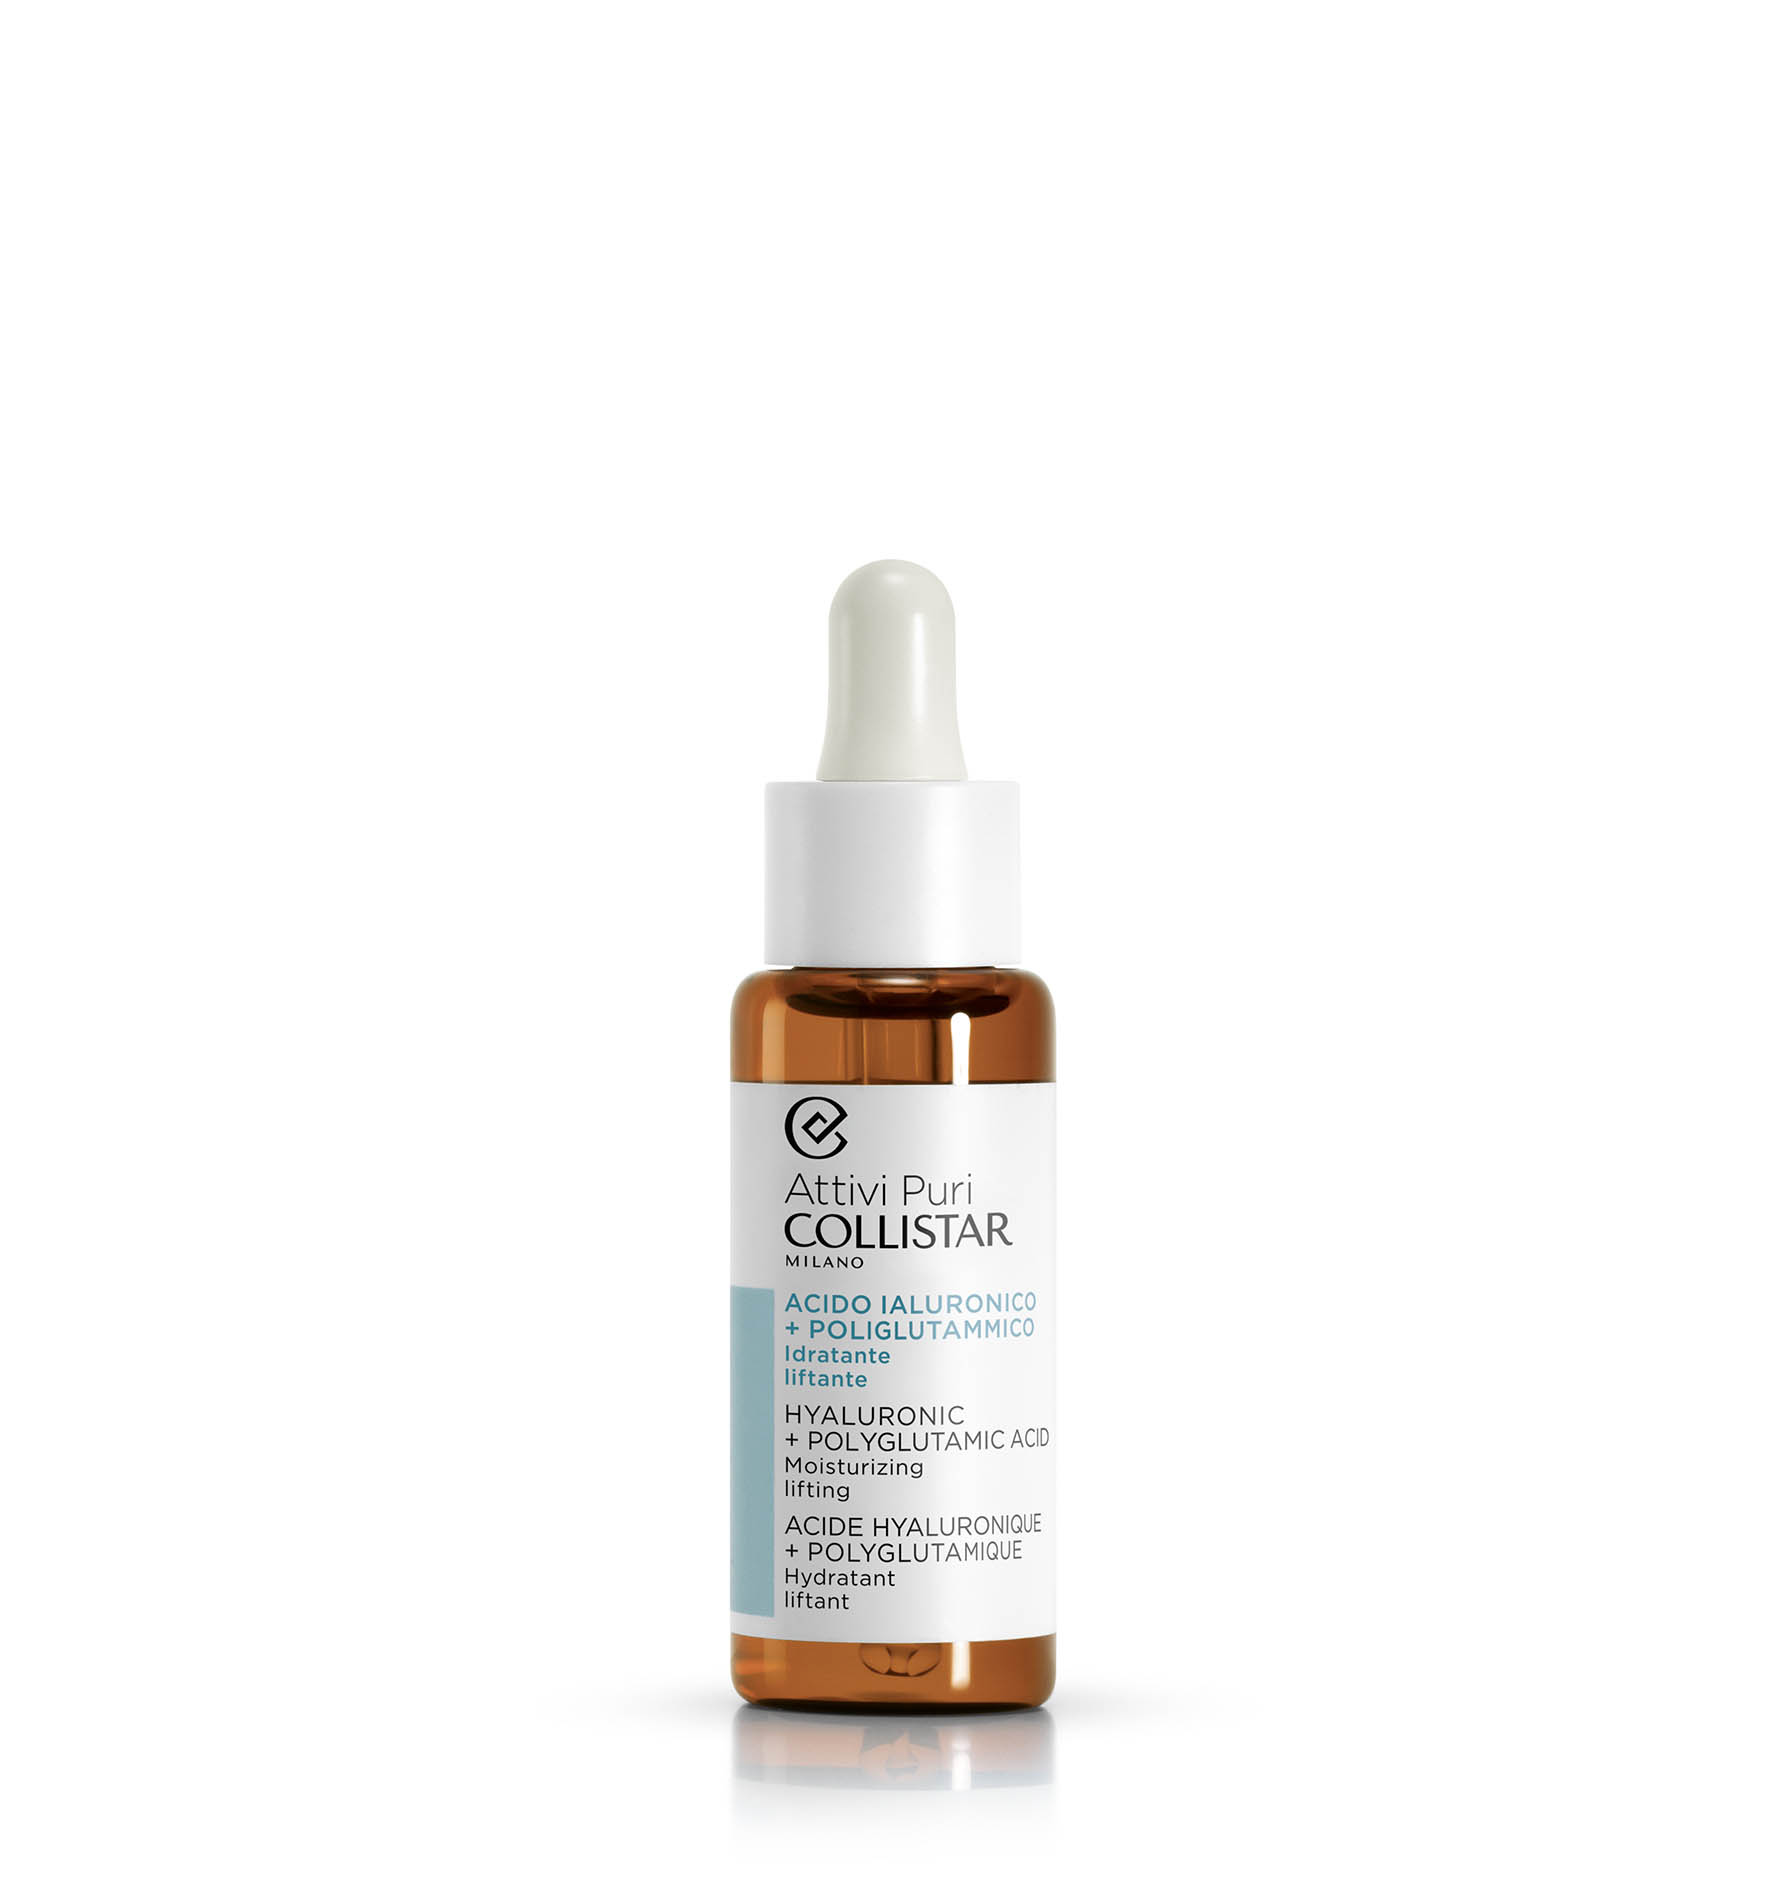 HYALURONIC + POLYGLUTAMIC ACID 30 ml - Hydraterend | Collistar - Shop Online Ufficiale